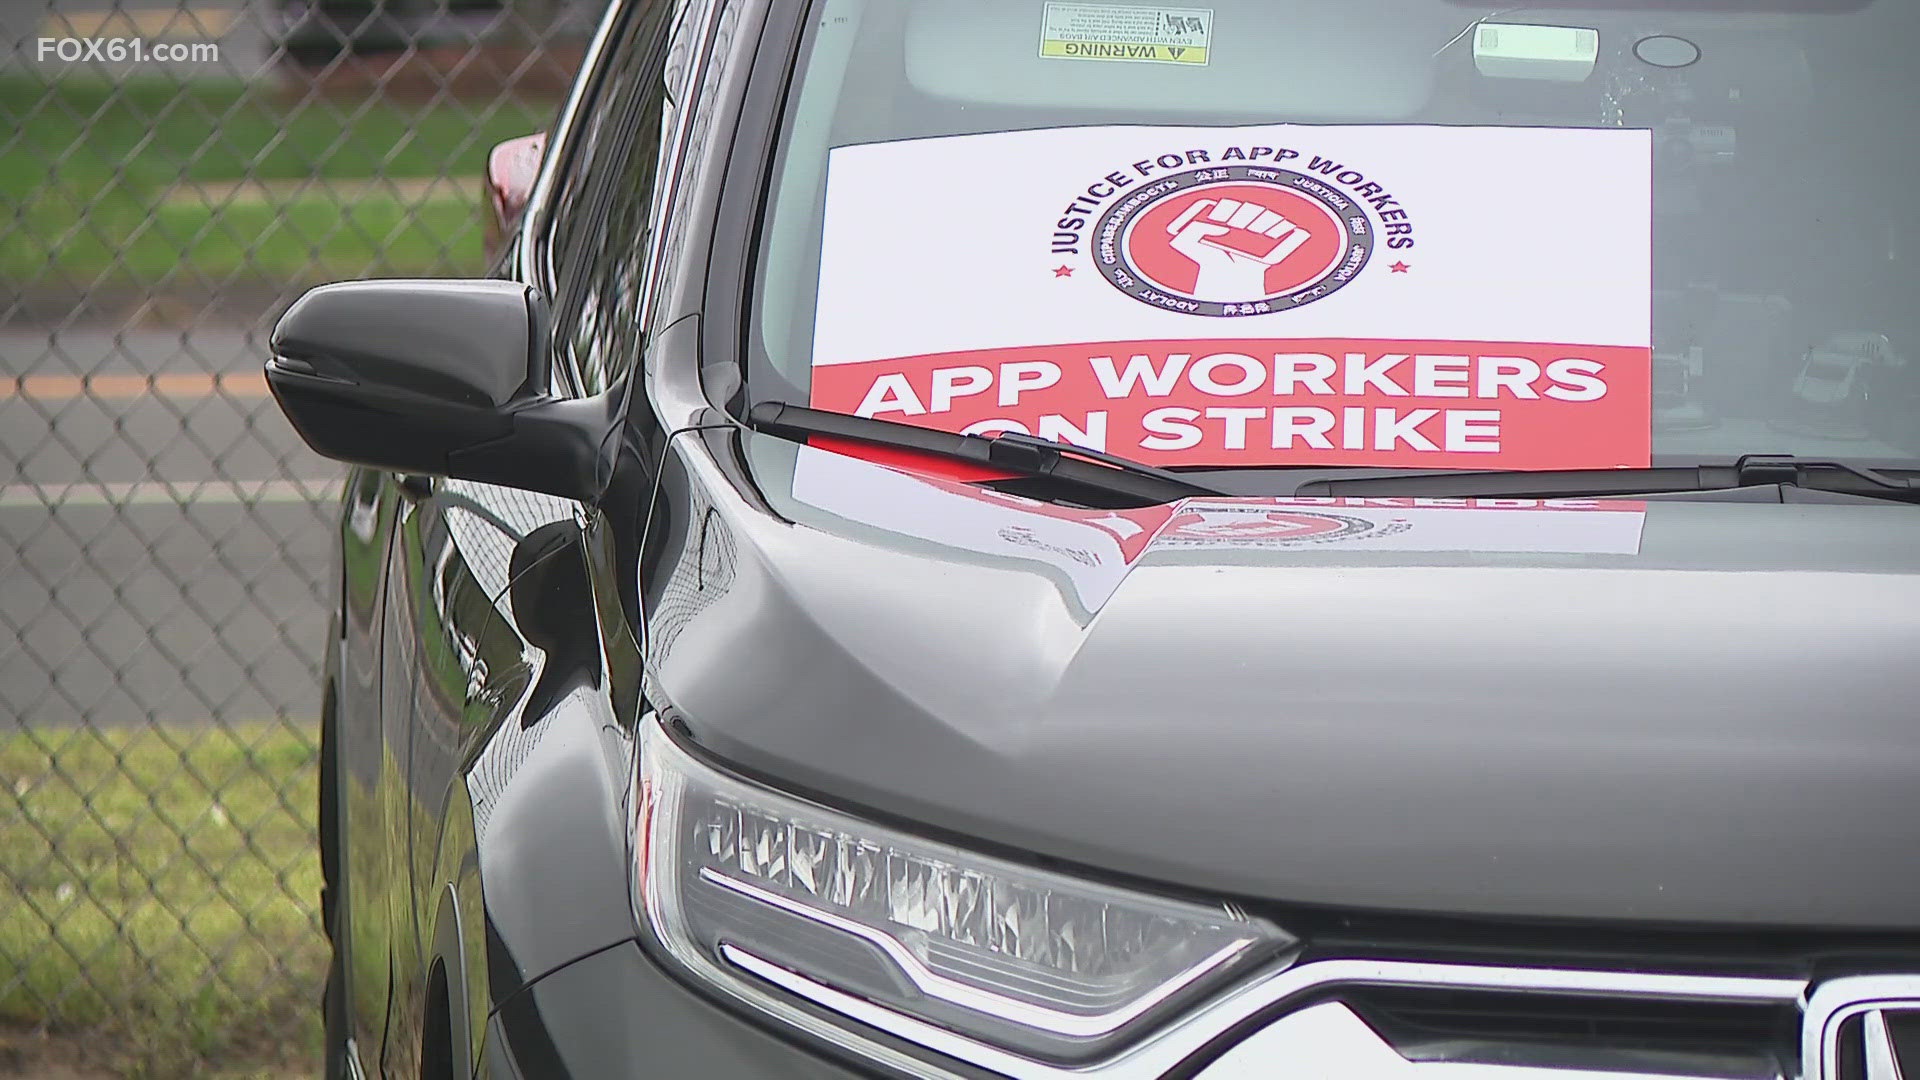 Rideshare service drivers say they are struggling. They are now rallying for better pay and safer working conditions.